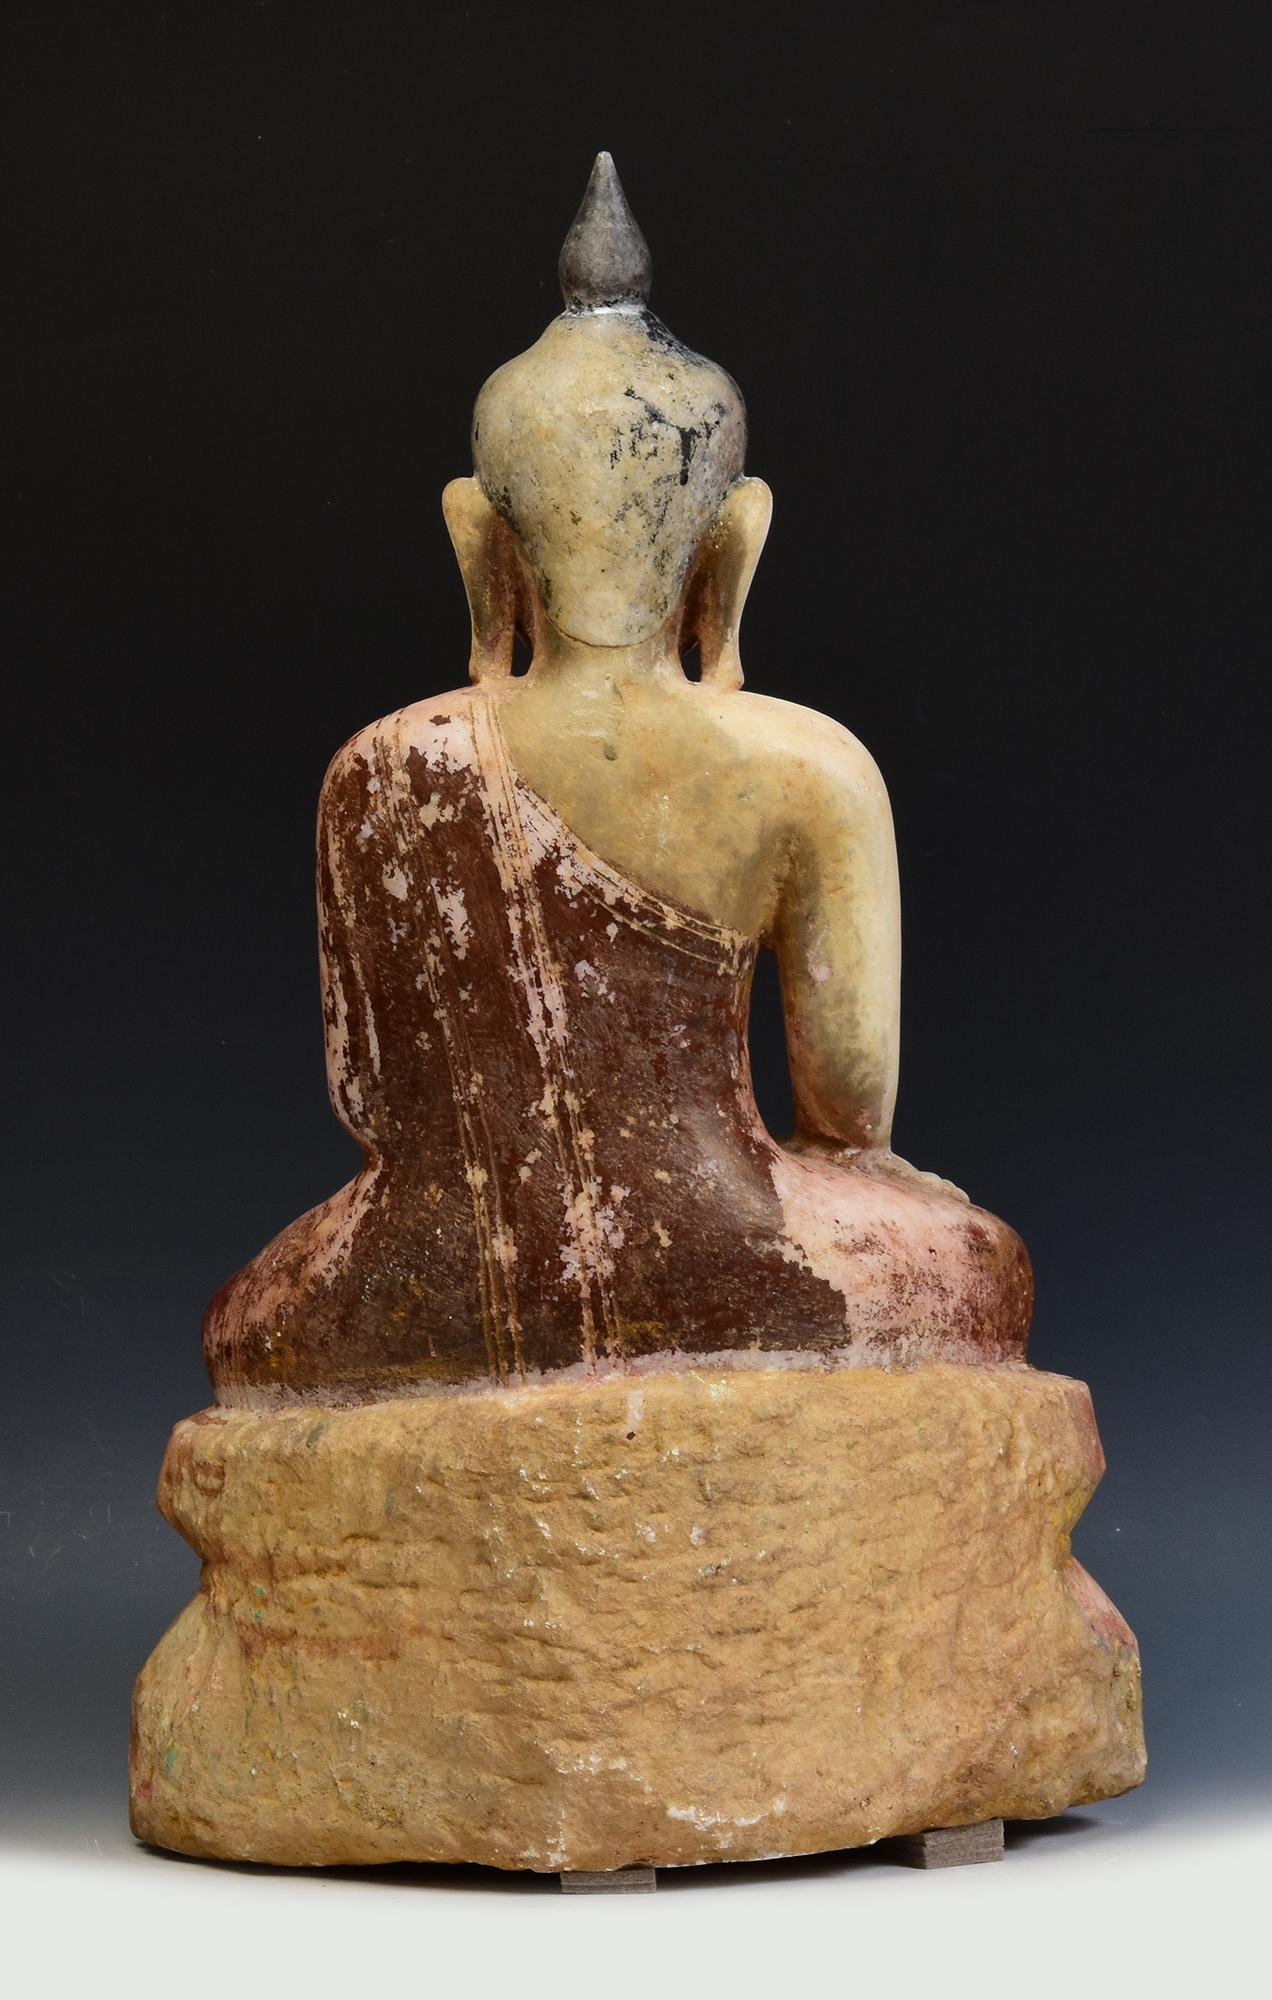 17th - 18th Century, Shan, Antique Burmese Alabaster Marble Seated Buddha Statue 6